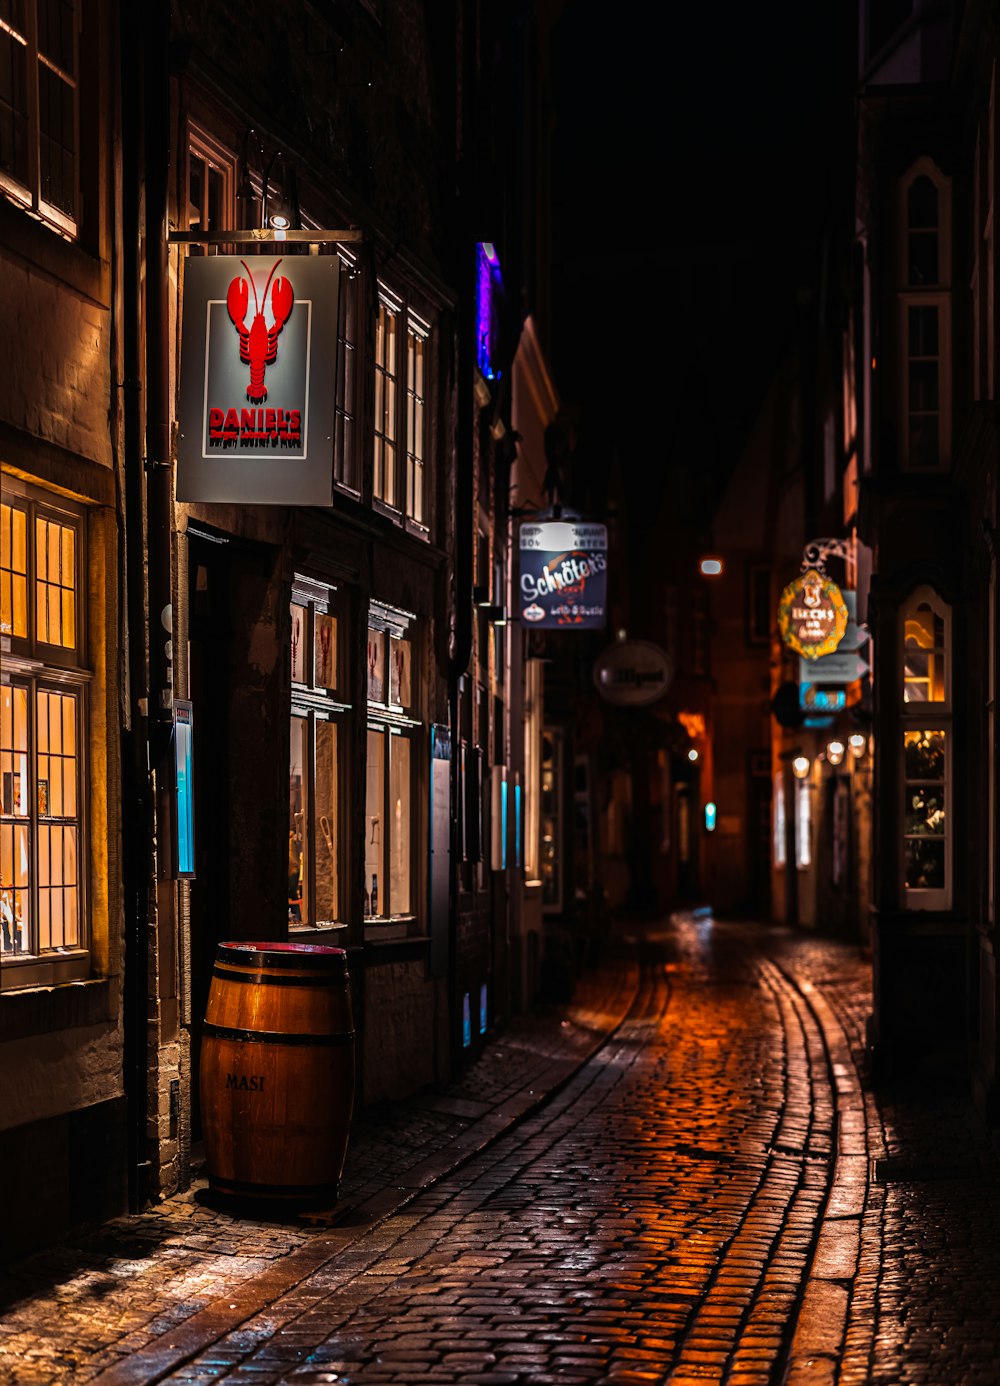 a cobblestone street at night with a barrel in the foreground